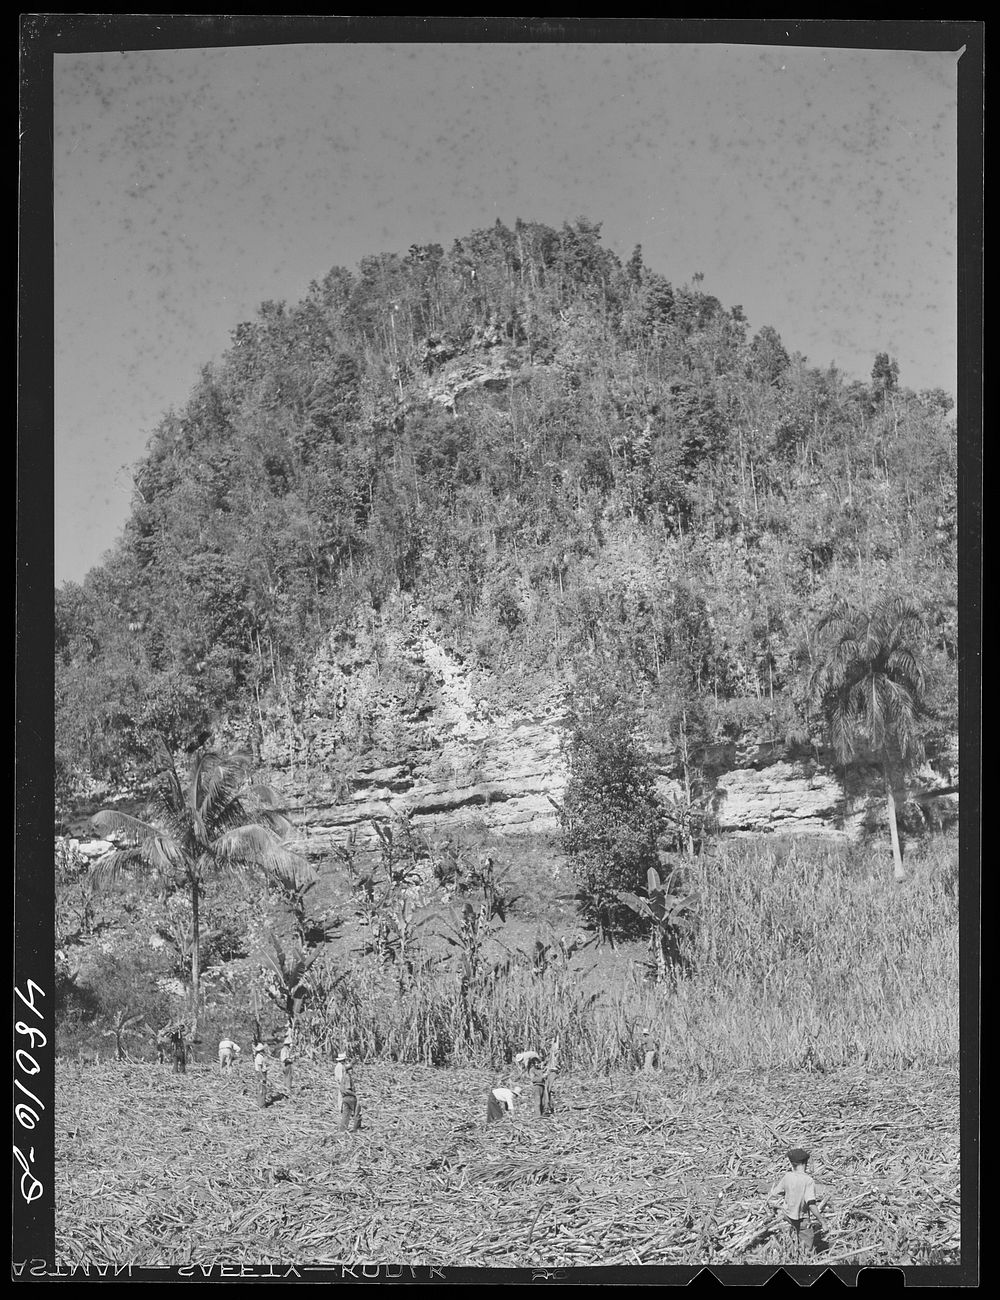 [Untitled photo, possibly related to: San Sebastian, Puerto Rico (vicinity). Harvesting cane in the poor hill area between…